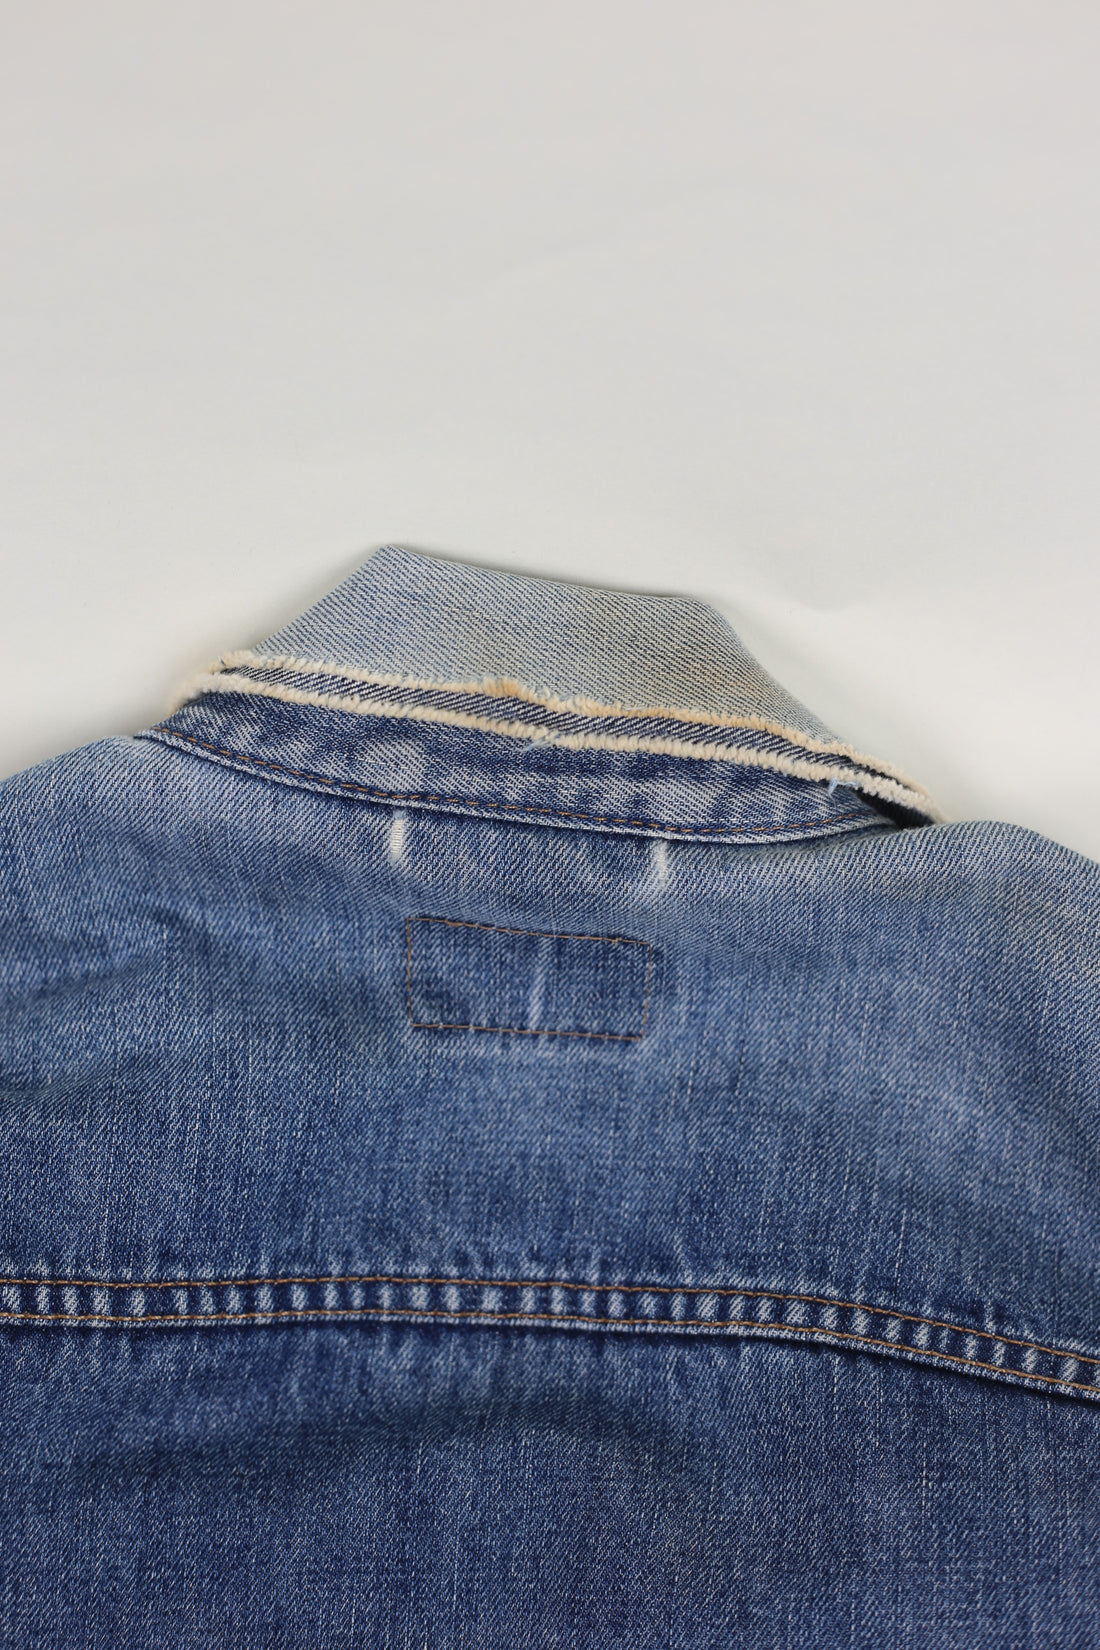 Giacca di Jeans LEVIS SNOOPY - L  -